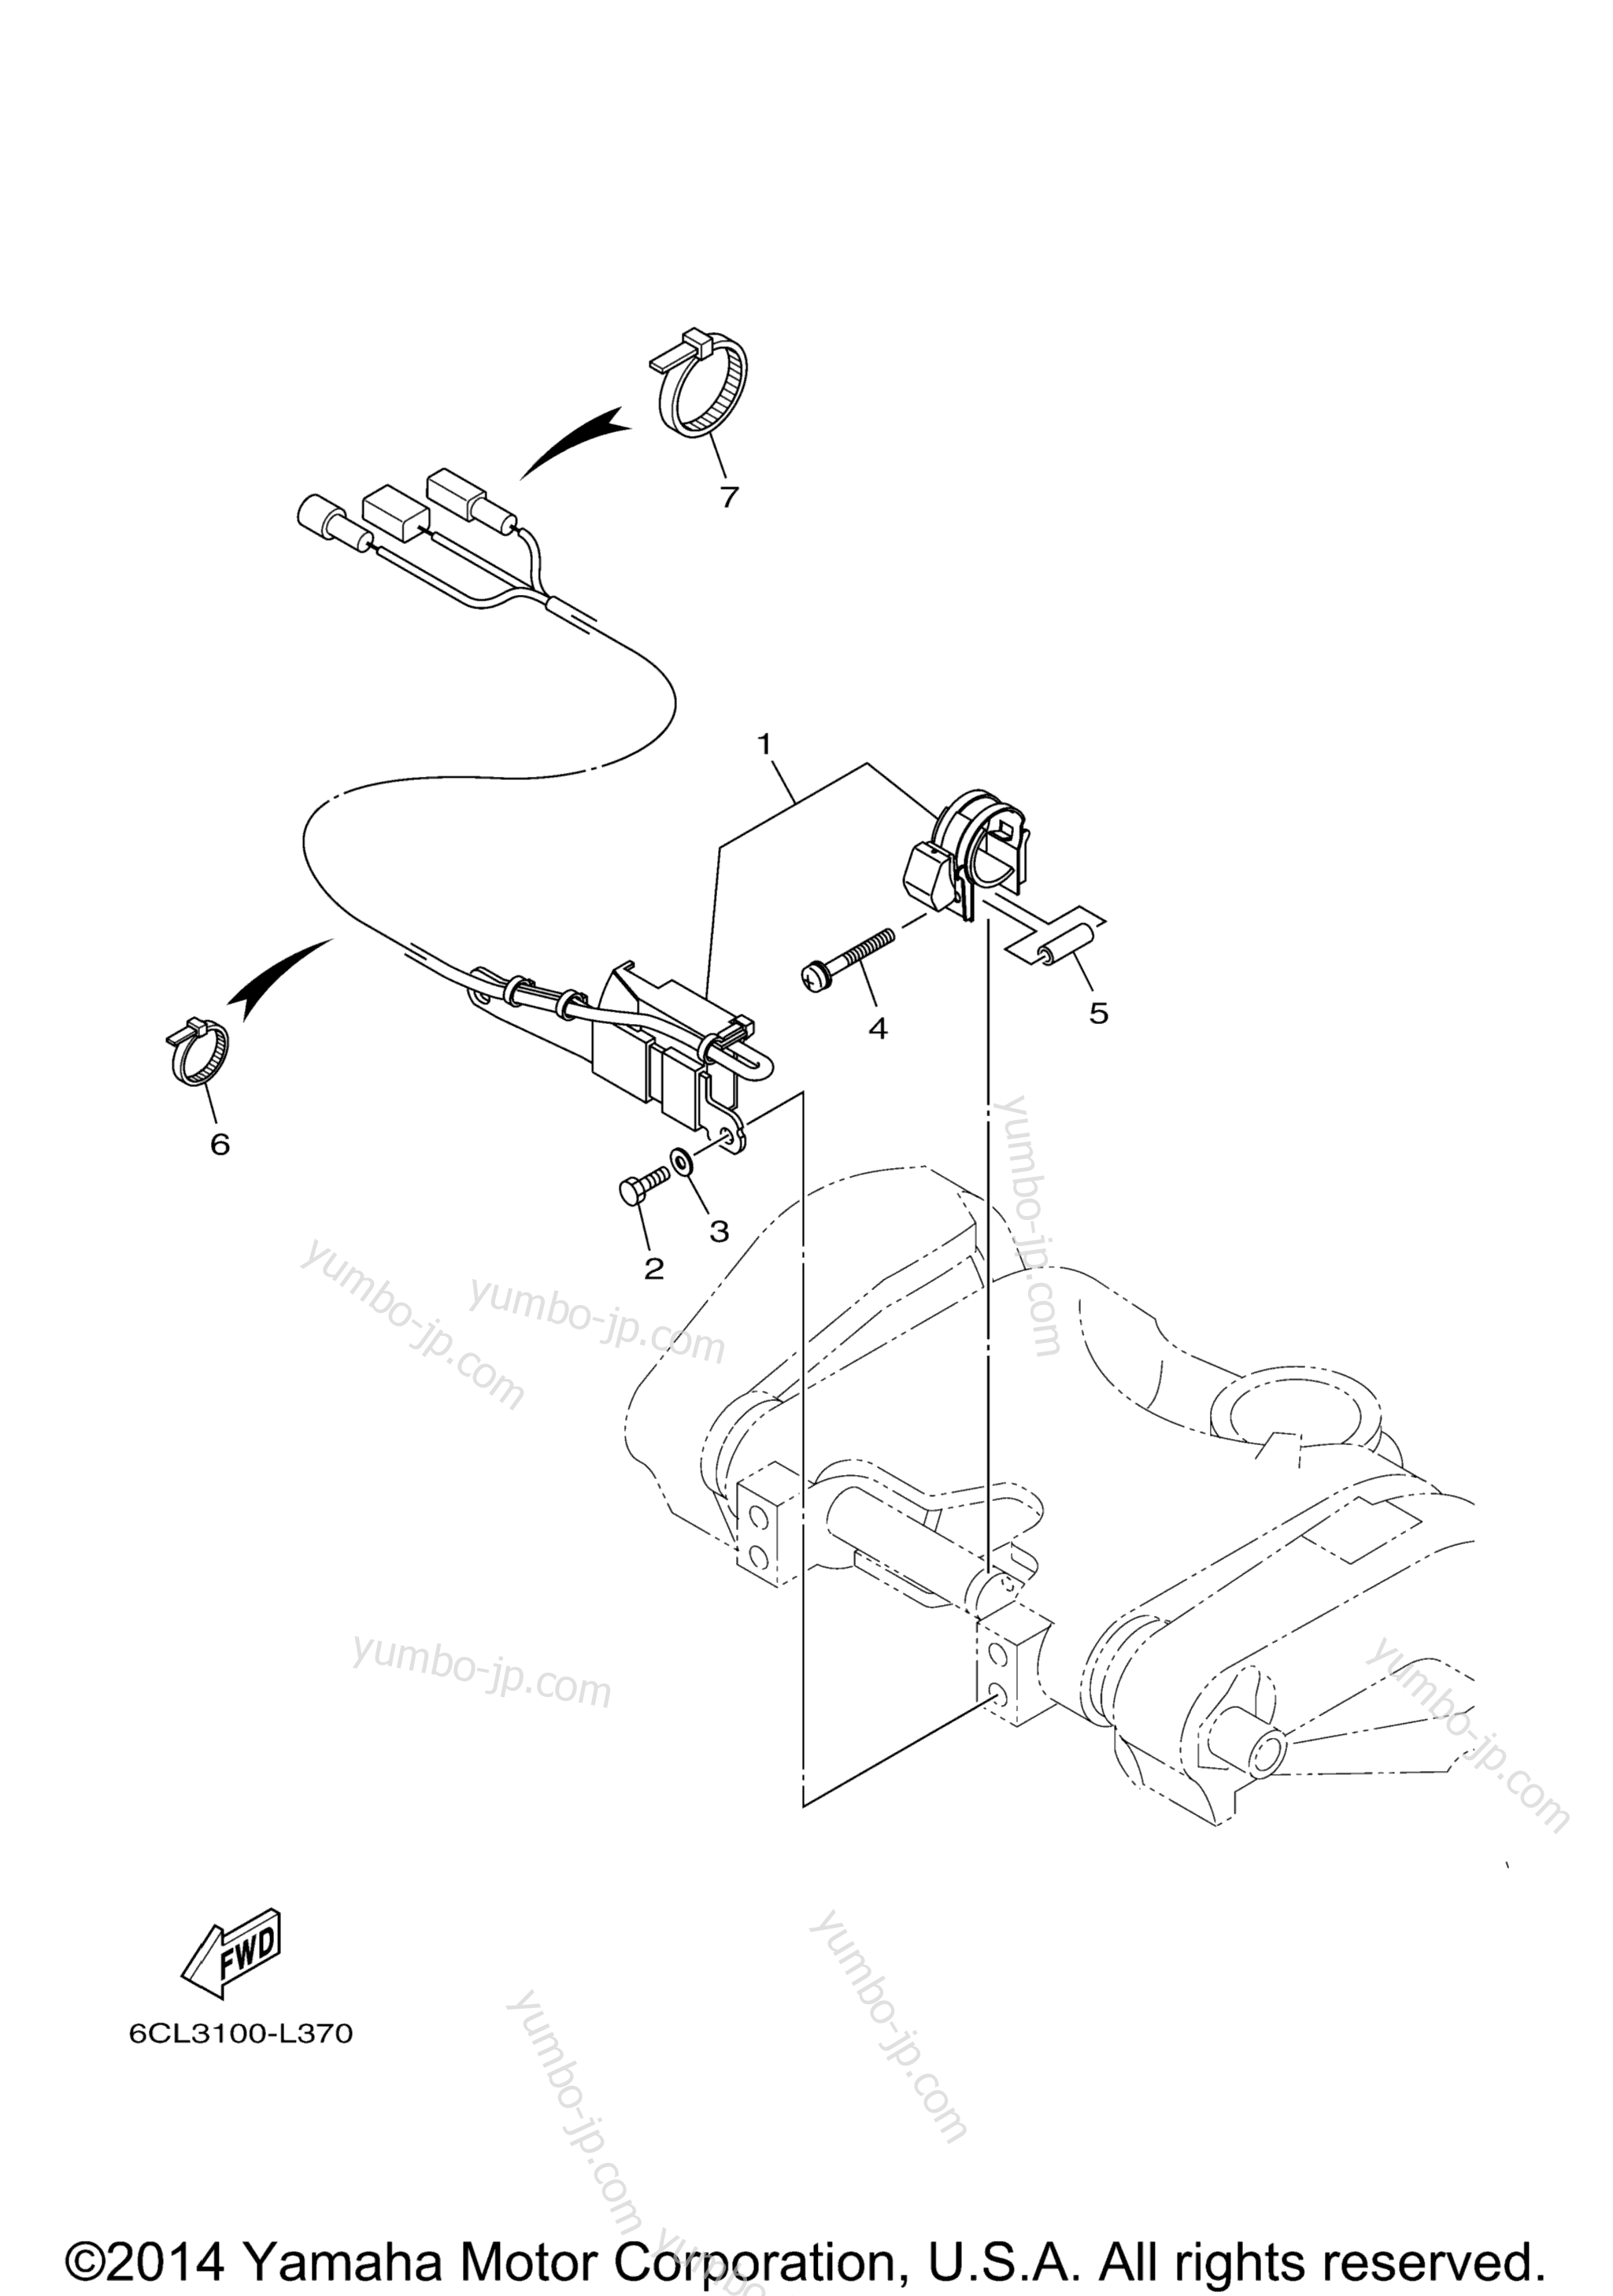 Optional Parts 2 for outboards YAMAHA LF250UCA_0 (0112) 2006 year